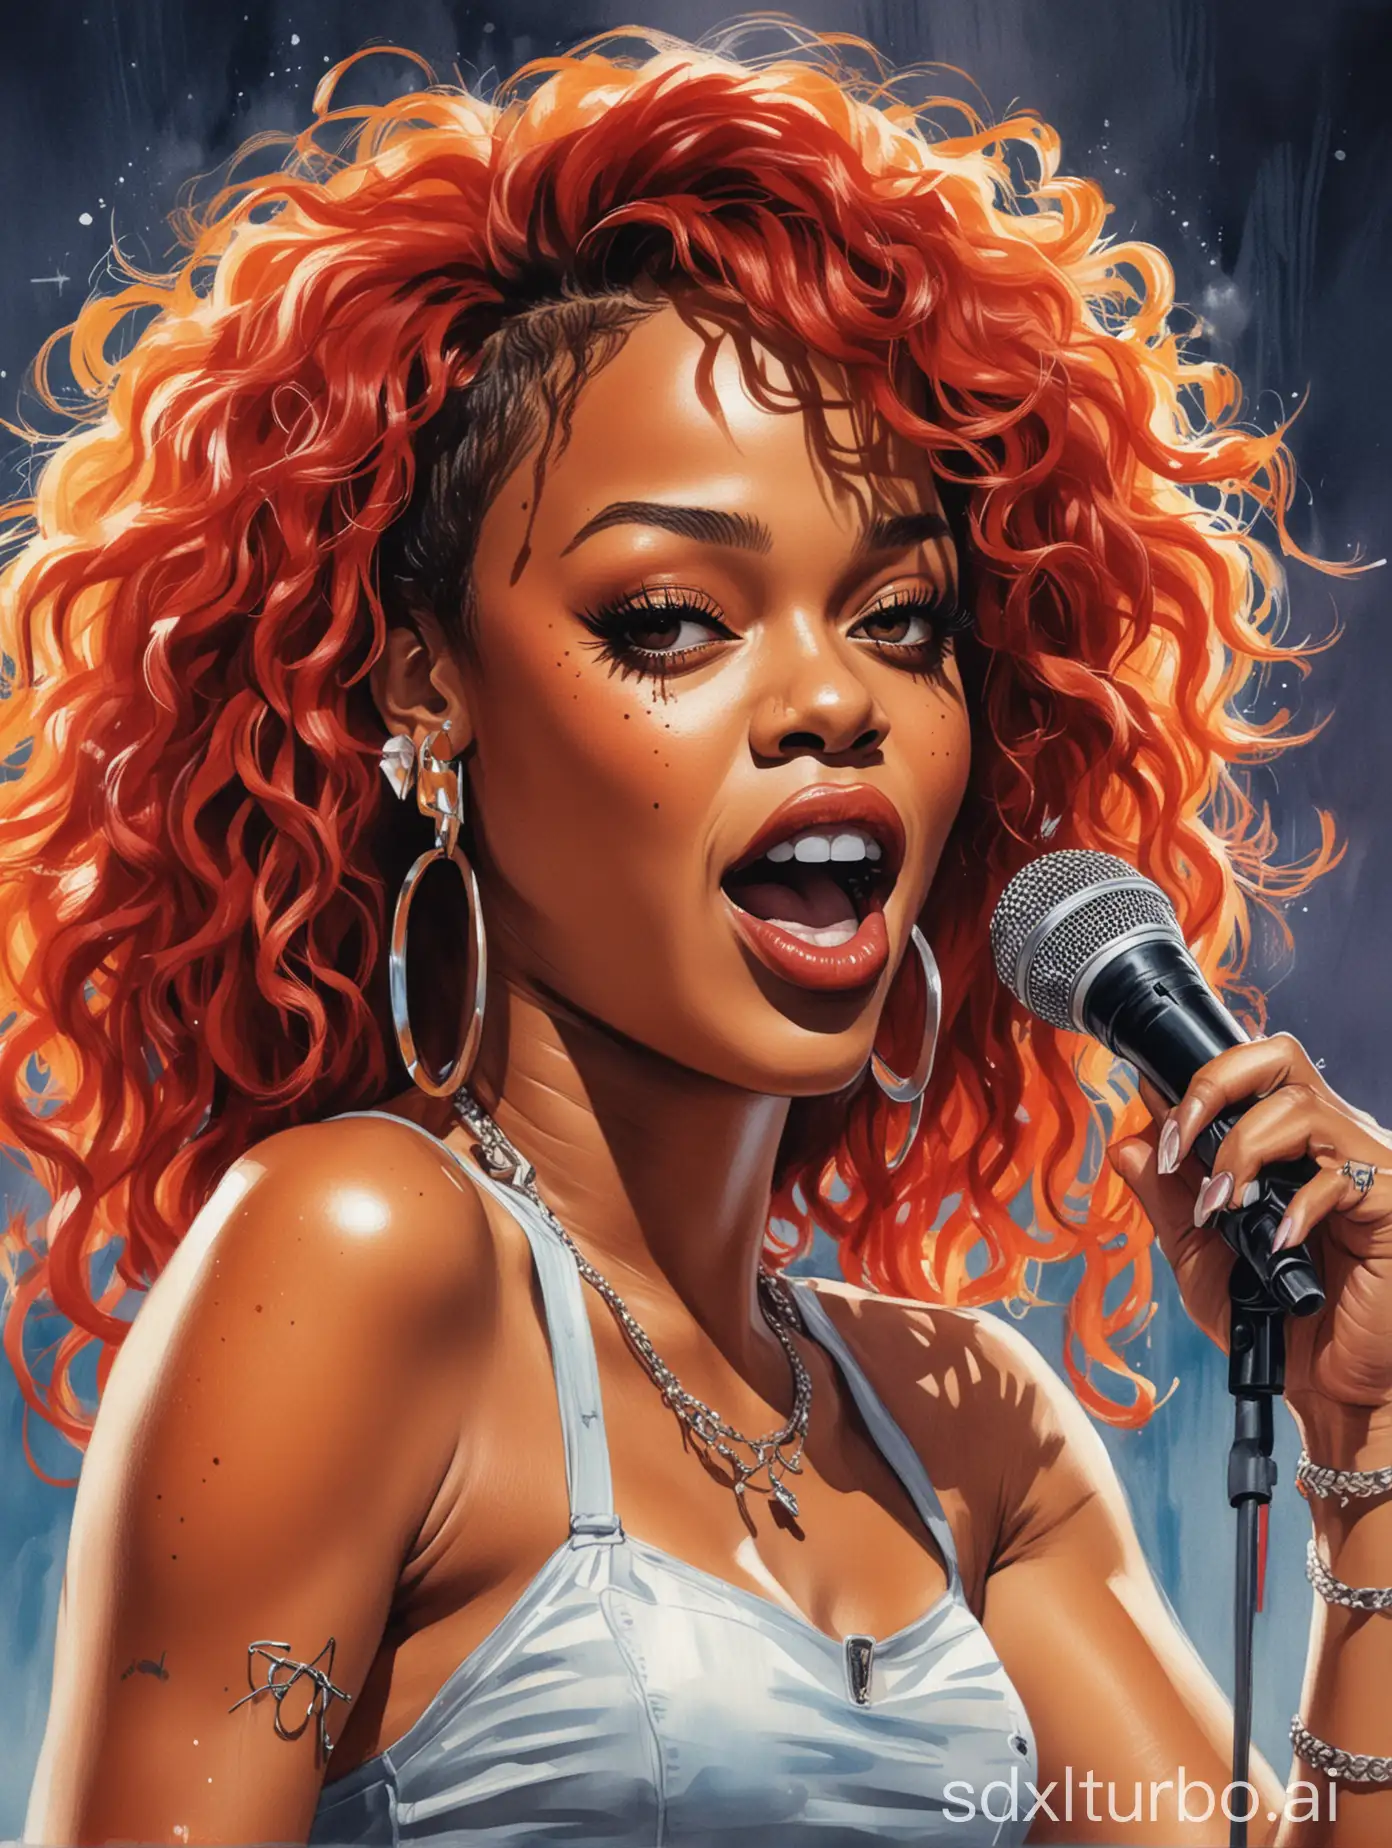 A colorful and whimsically drawn (((caricature of Rihanna))) performing on a (mammoth stage), with exaggerated features and expressions that convey her kinetic persona, capturing the essence of her electrifying live shows